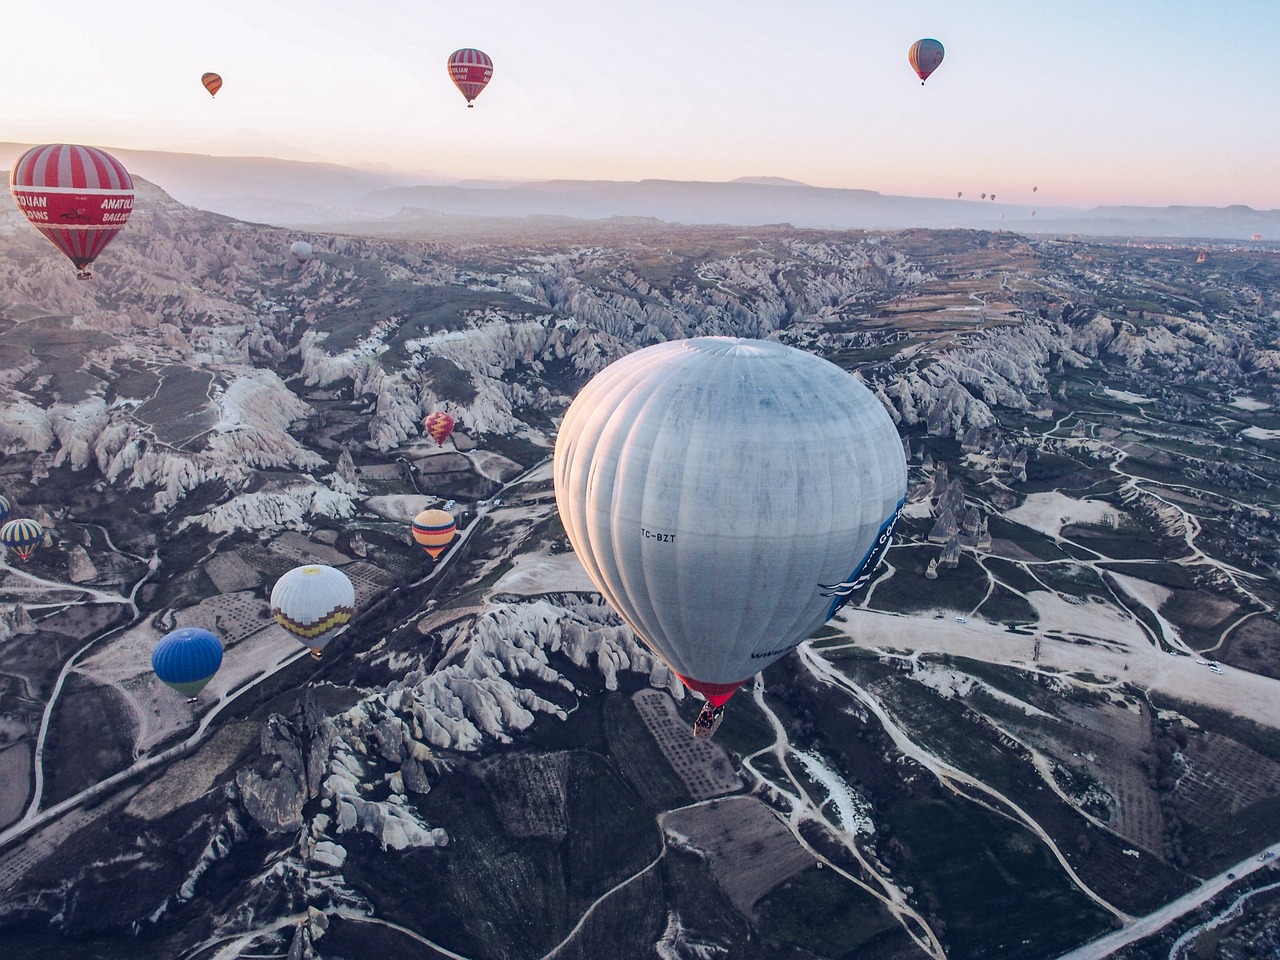 How to Travel from Marmaris to Cappadocia?